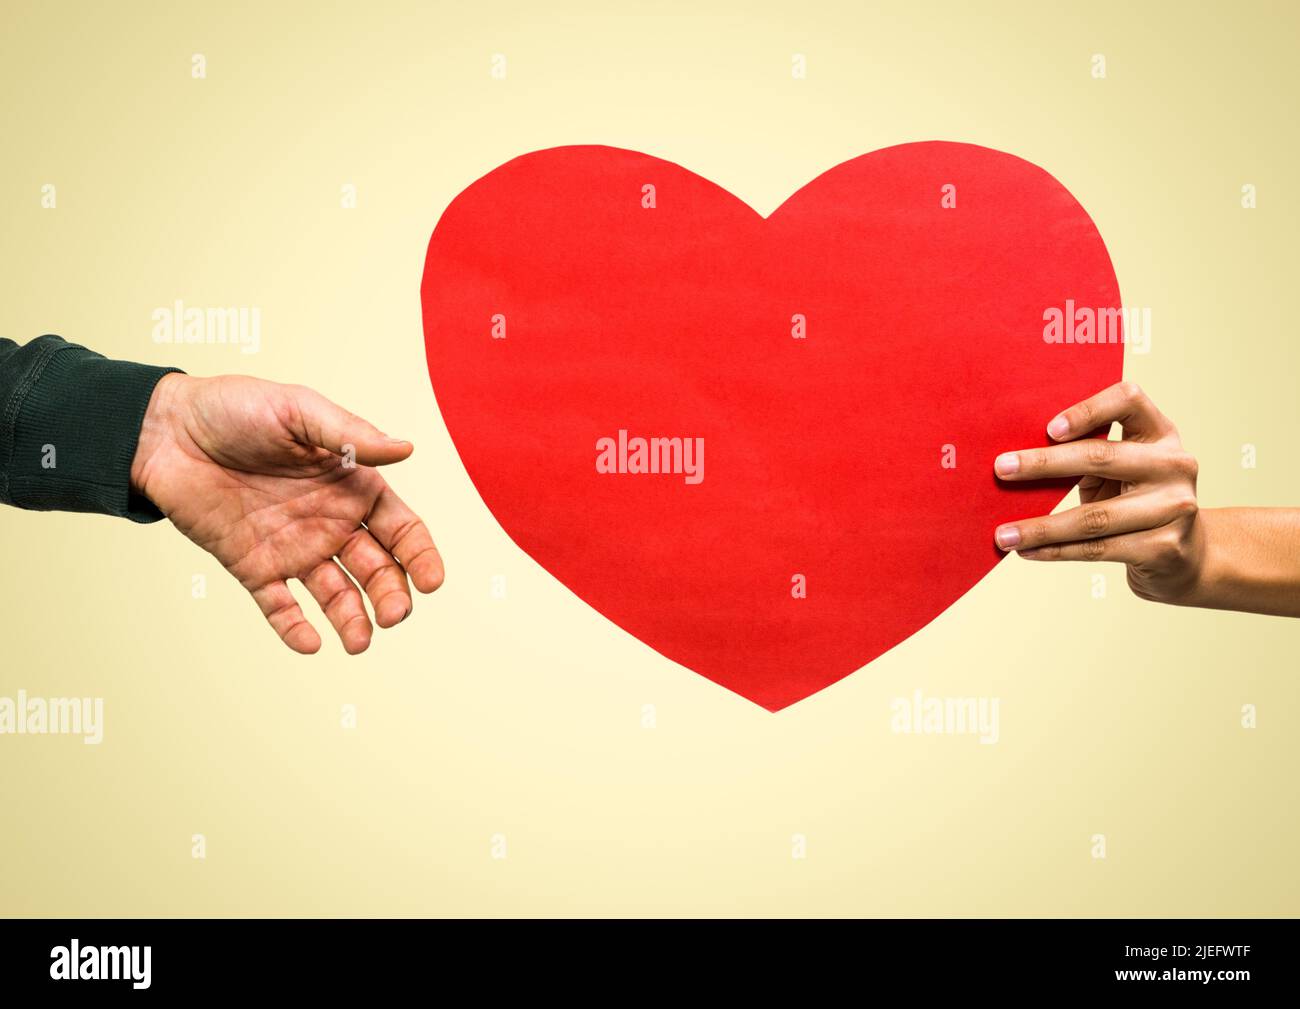 https://c8.alamy.com/comp/2JEFWTF/close-up-of-hand-passing-a-heart-shaped-placard-against-copy-space-on-pink-background-2JEFWTF.jpg